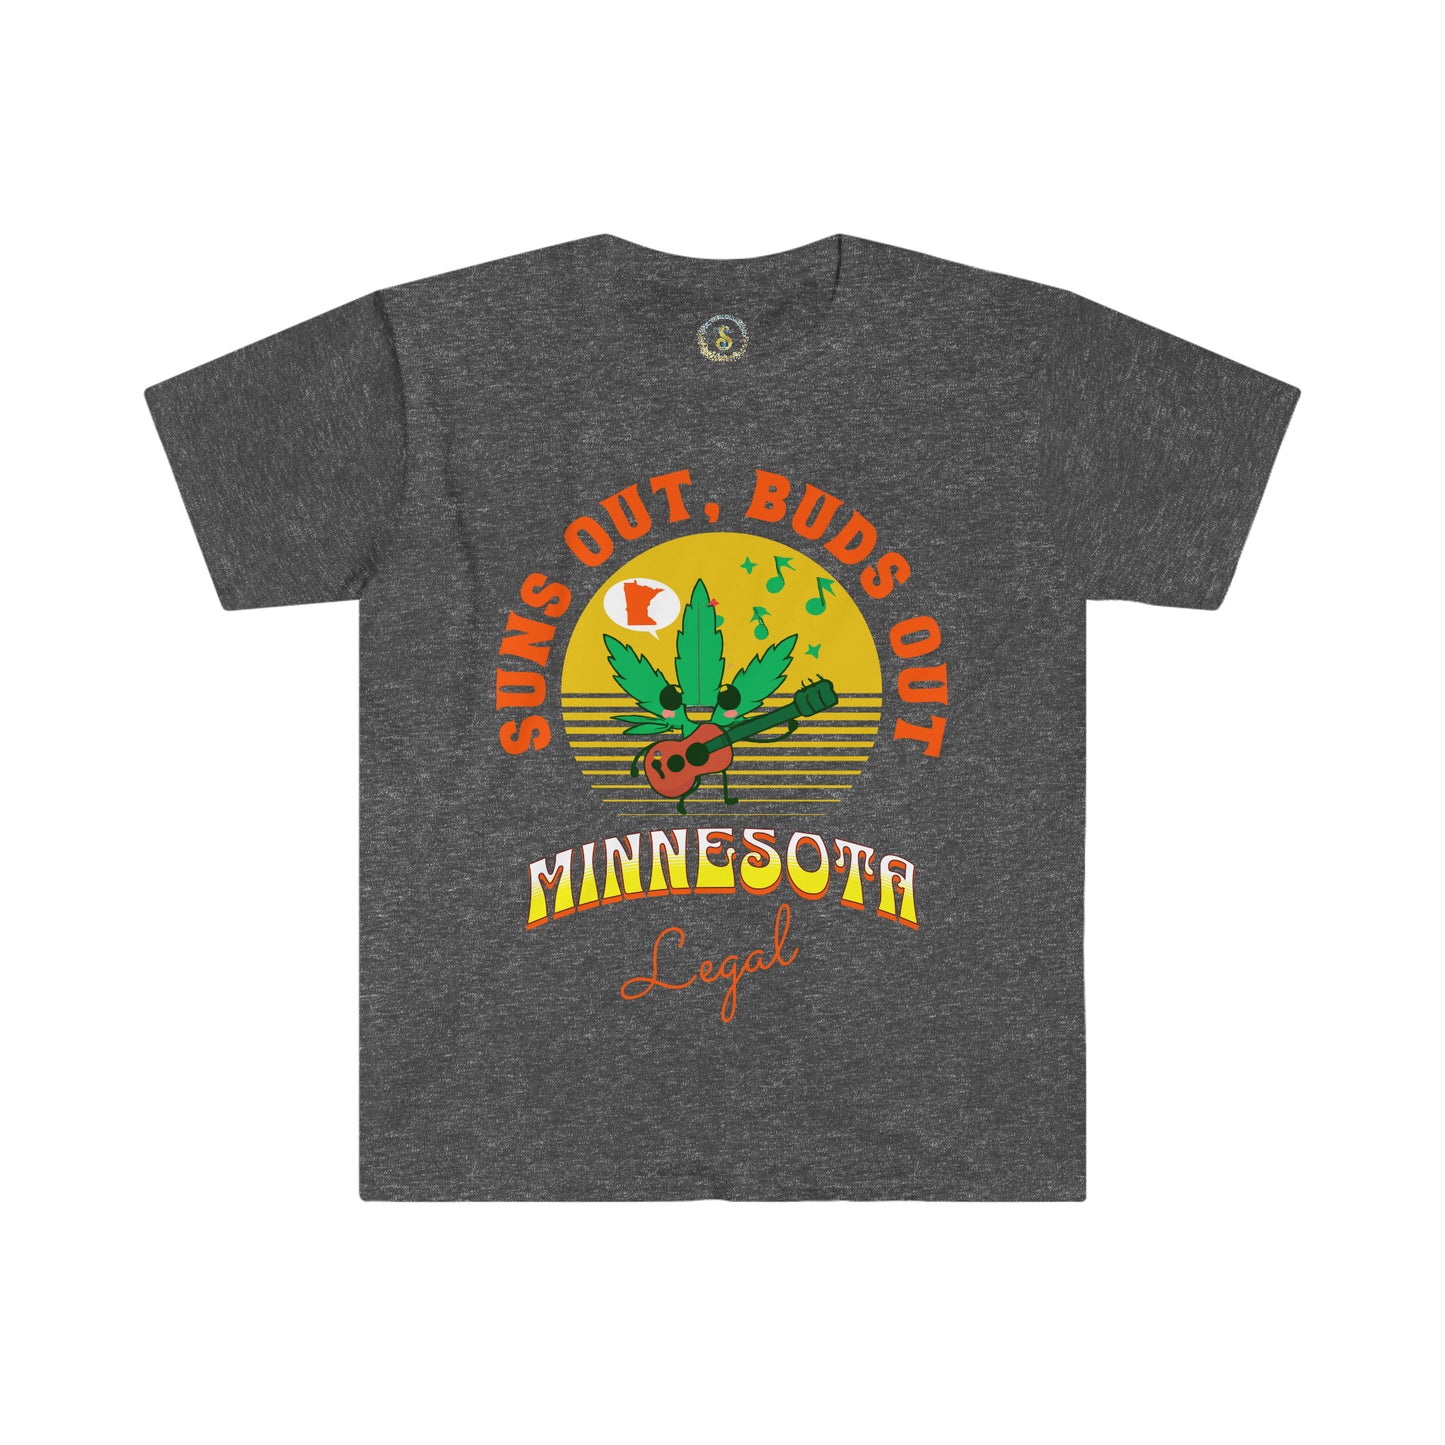 Suns Out, Buds Out | Minnesota Legal T-Shirt